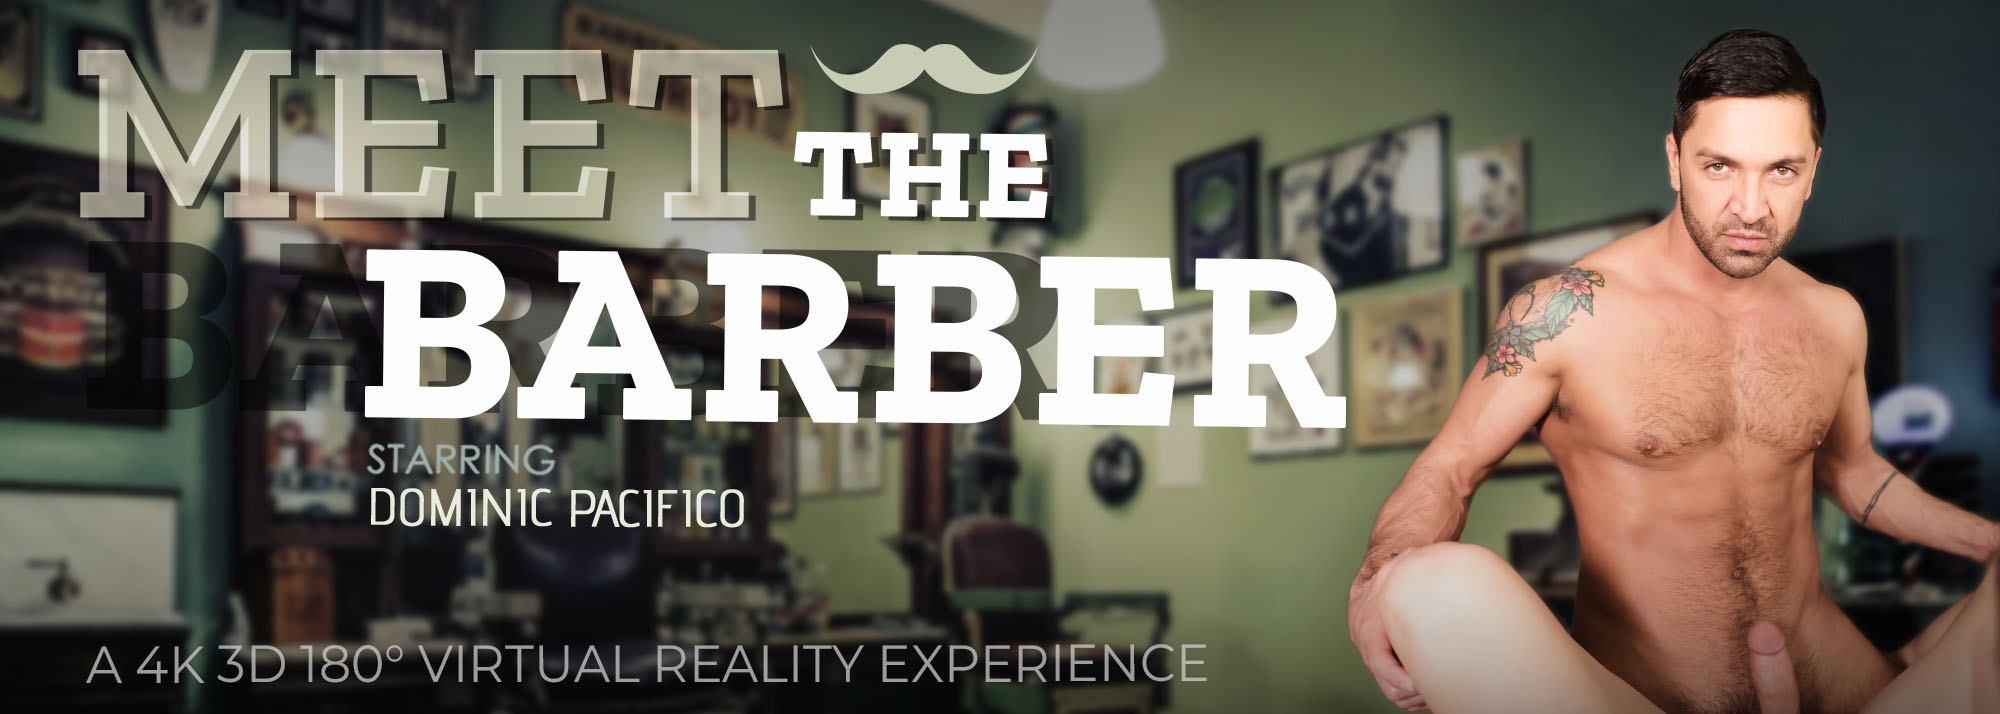 Meet the Barber - Gay VR Porn Video, Starring: Dominic Pacifico